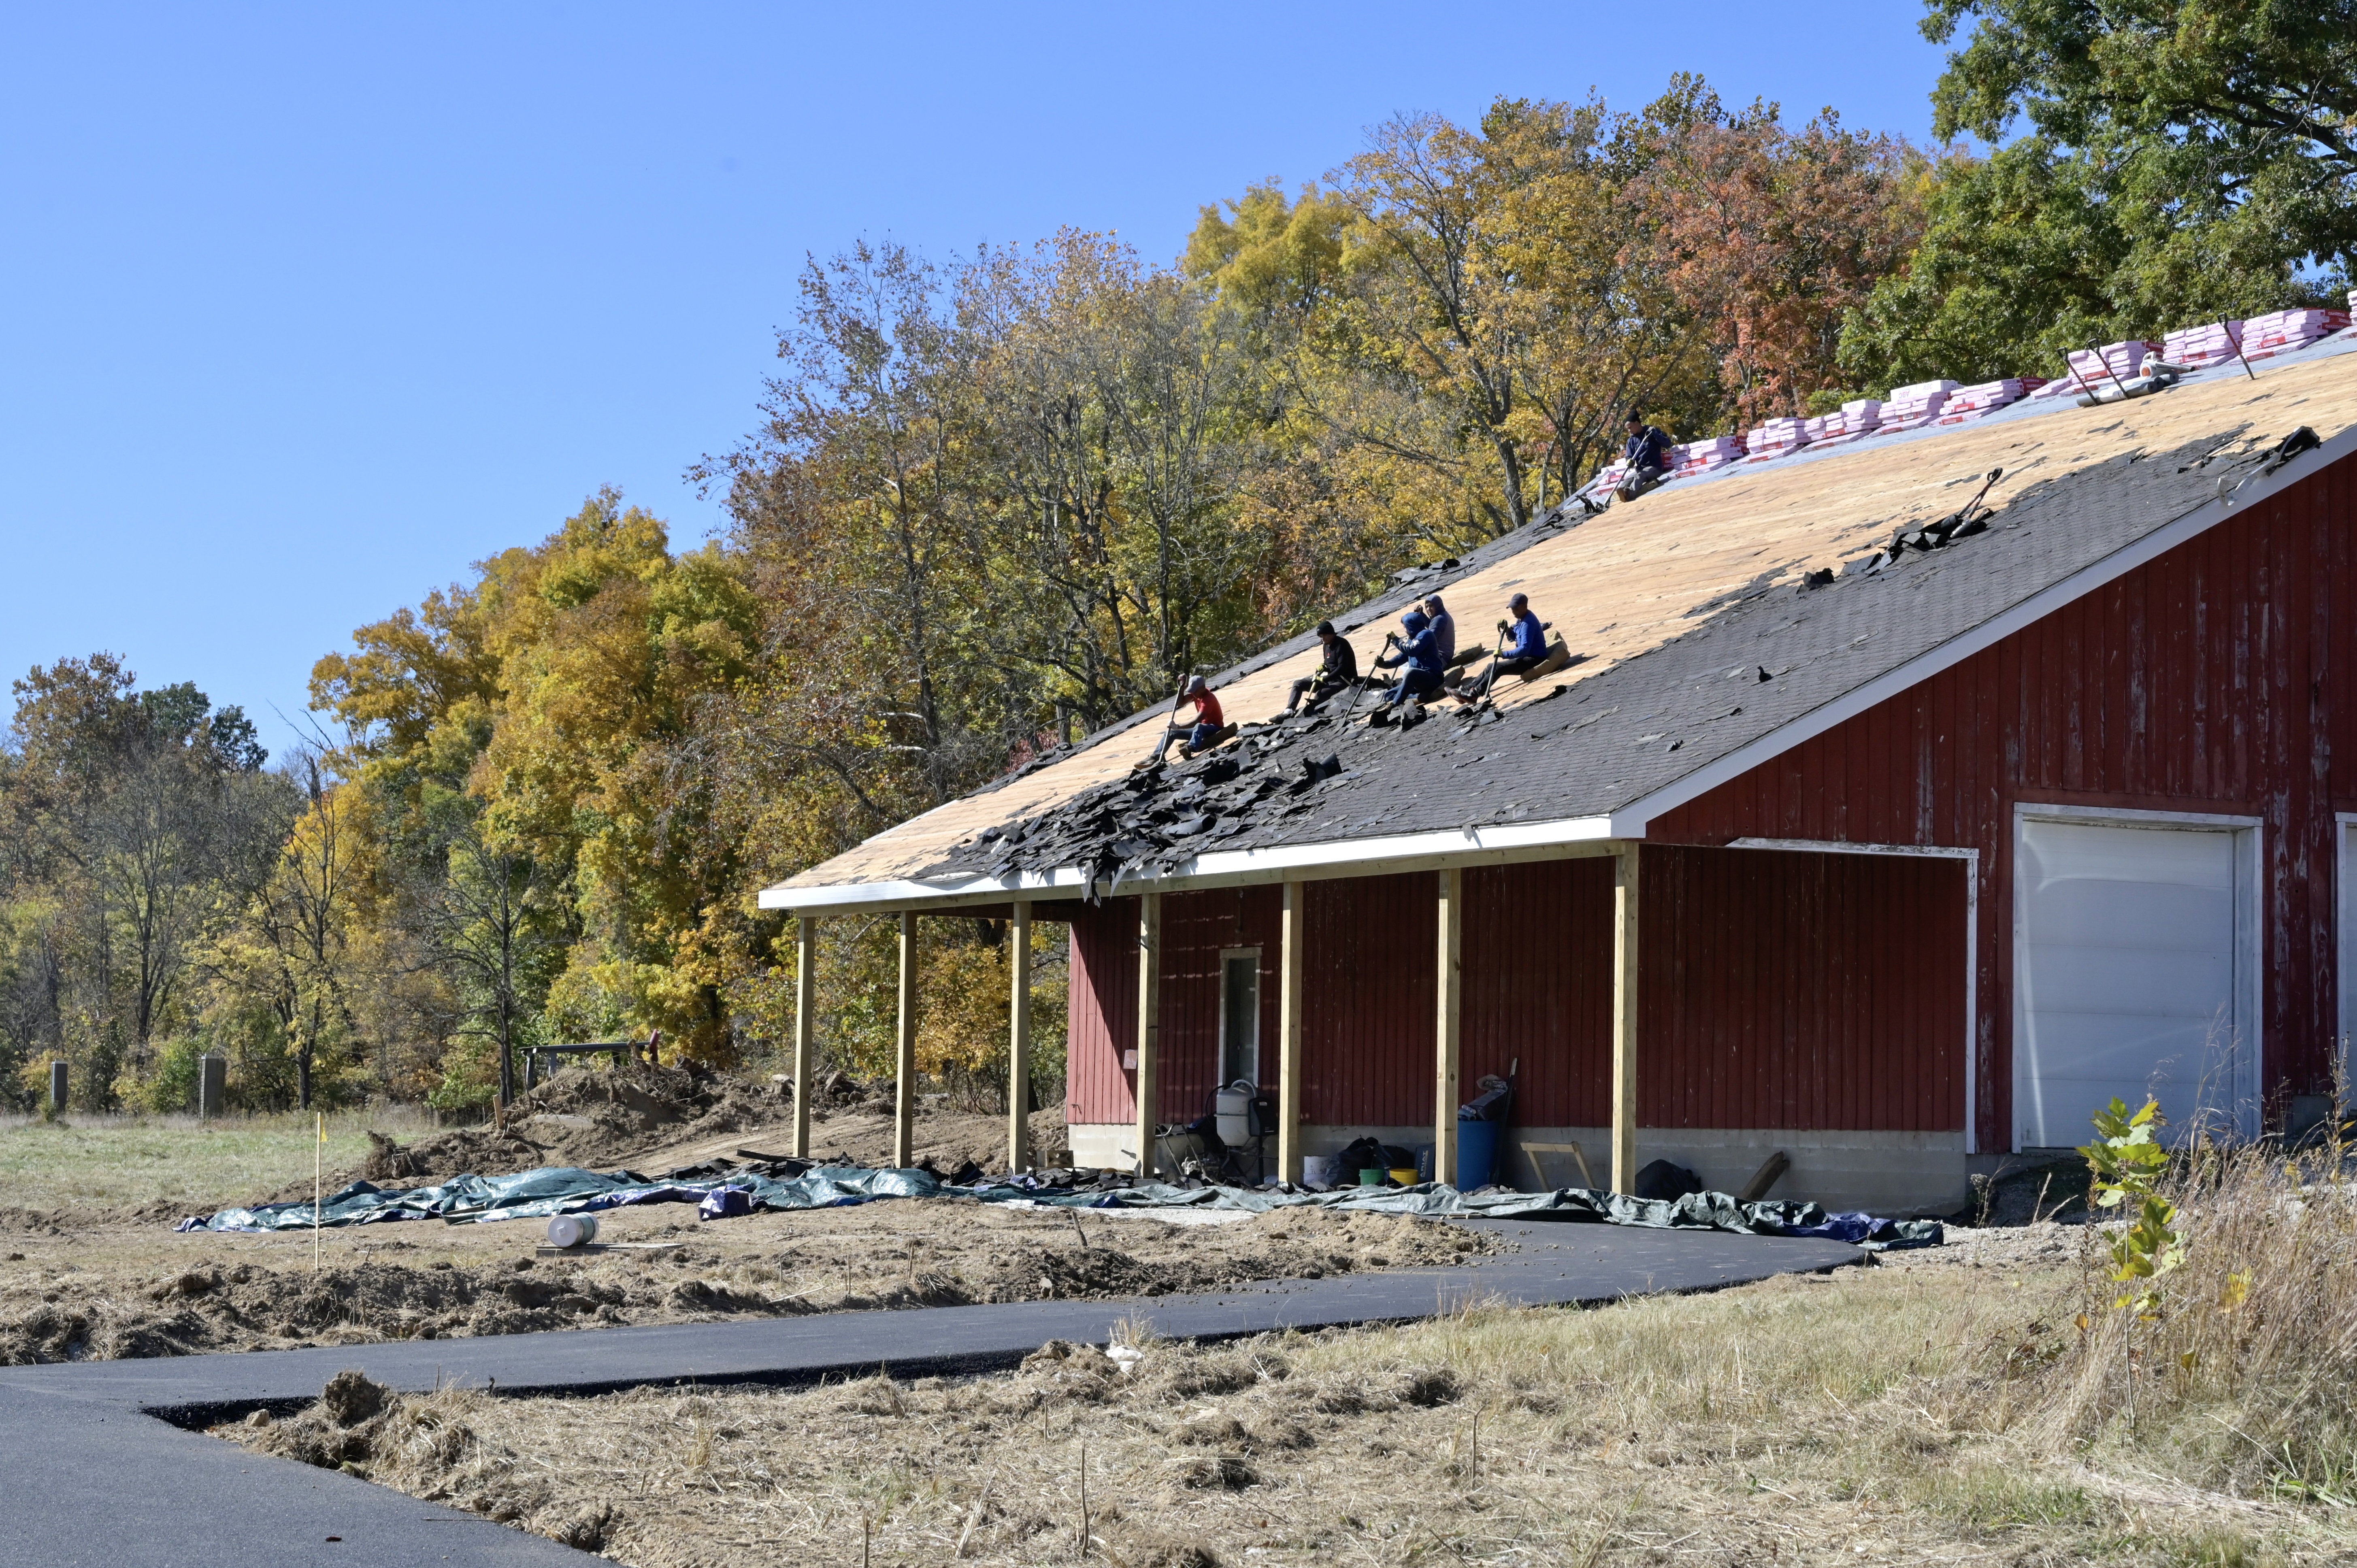 Photo shows a red barn at Goat Farm Park, with six people sitting on the roof and scraping off black shingles to reveal light colored decking beneath.